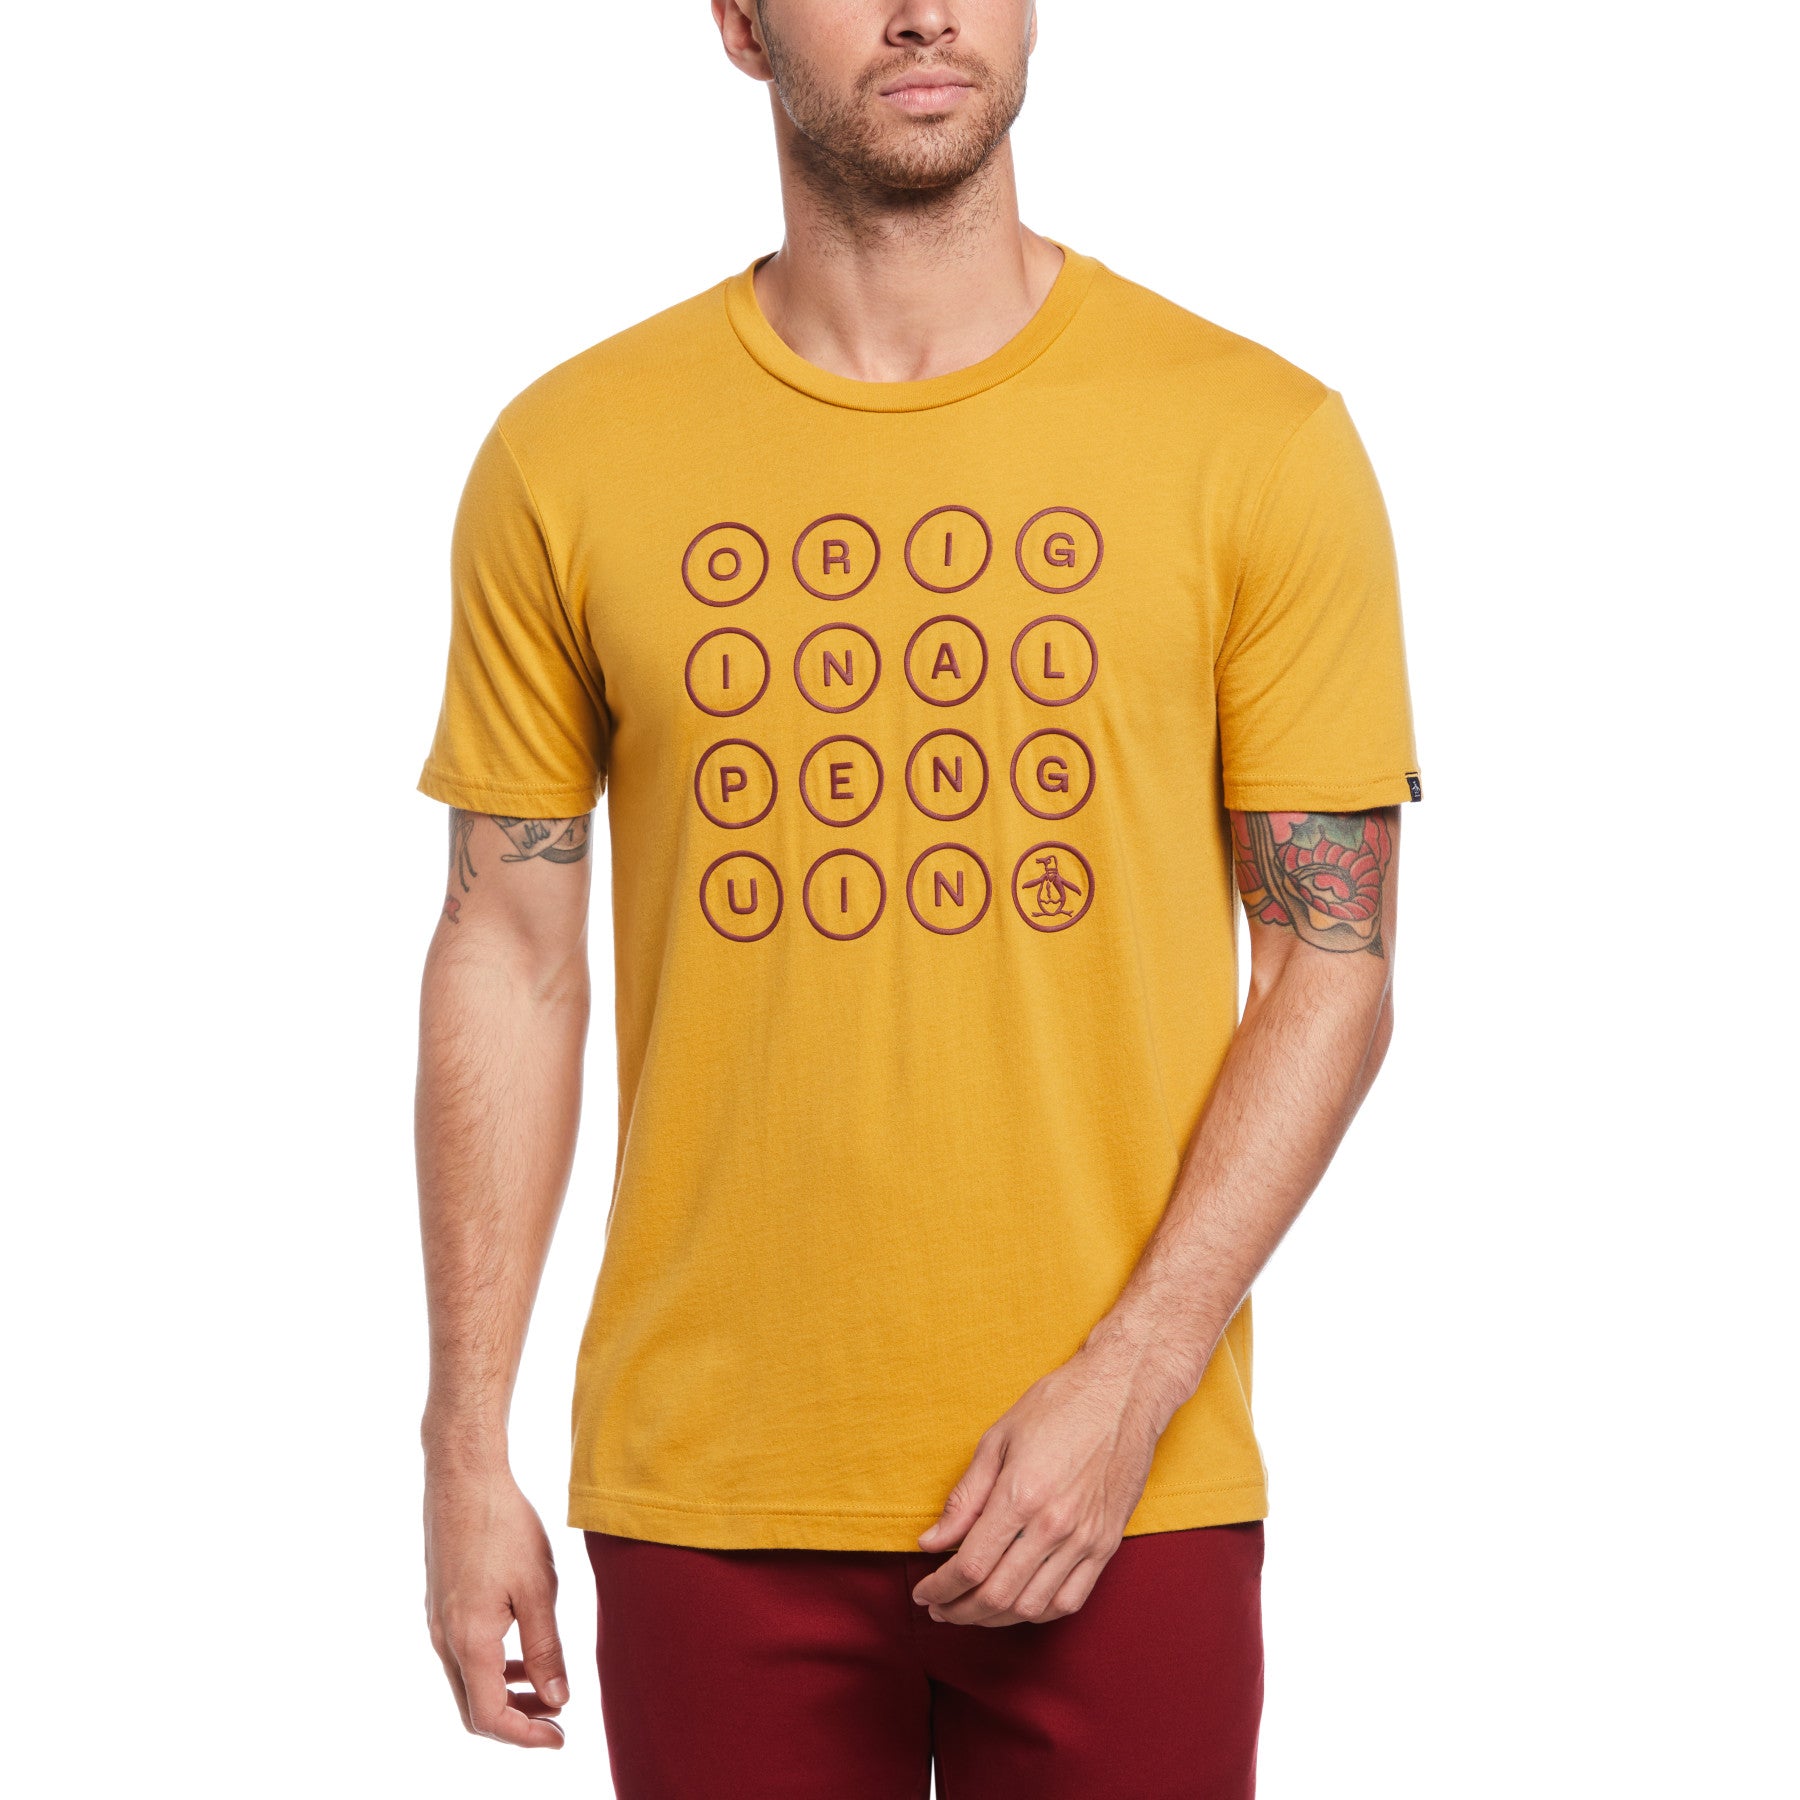 View Organic Cotton Knit Graphic Organic Cotton TShirt In Harvest Gold information